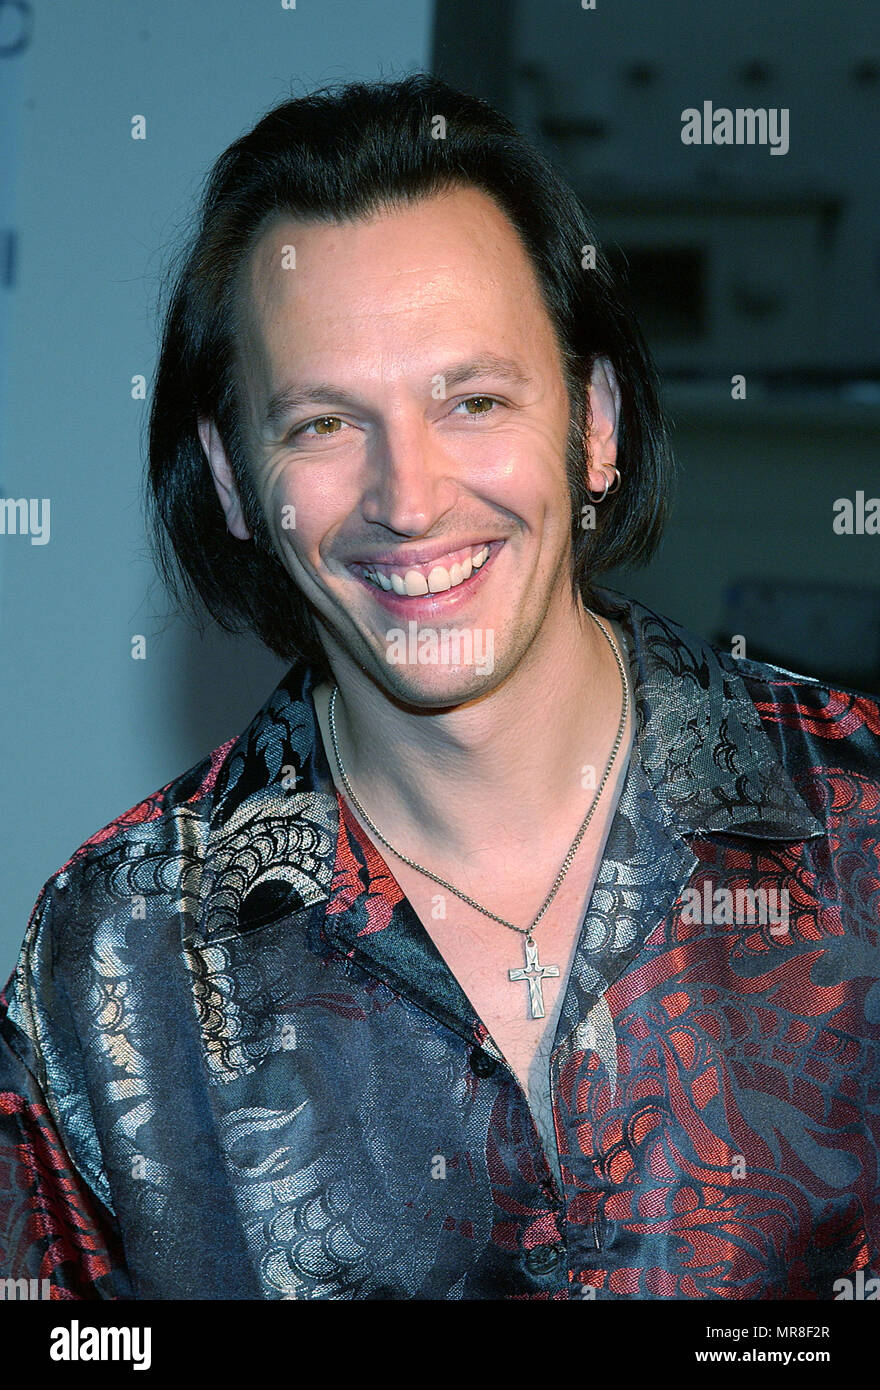 Steve Valentine (Crossing Jordan) arriving at the party for the Paramount DVD Release of 70' movies '' Grease, Saturday Night Fever, Flashdance, Footloose, Urban Cowboy and Staying Alive '' on the back lot of the Paramount Studio in Los Angeles. September 24, 2002. ValentineSteve58 Red Carpet Event, Vertical, USA, Film Industry, Celebrities,  Photography, Bestof, Arts Culture and Entertainment, Topix Celebrities fashion /  Vertical, Best of, Event in Hollywood Life - California,  Red Carpet and backstage, USA, Film Industry, Celebrities,  movie celebrities, TV celebrities, Music celebrities, P Stock Photo